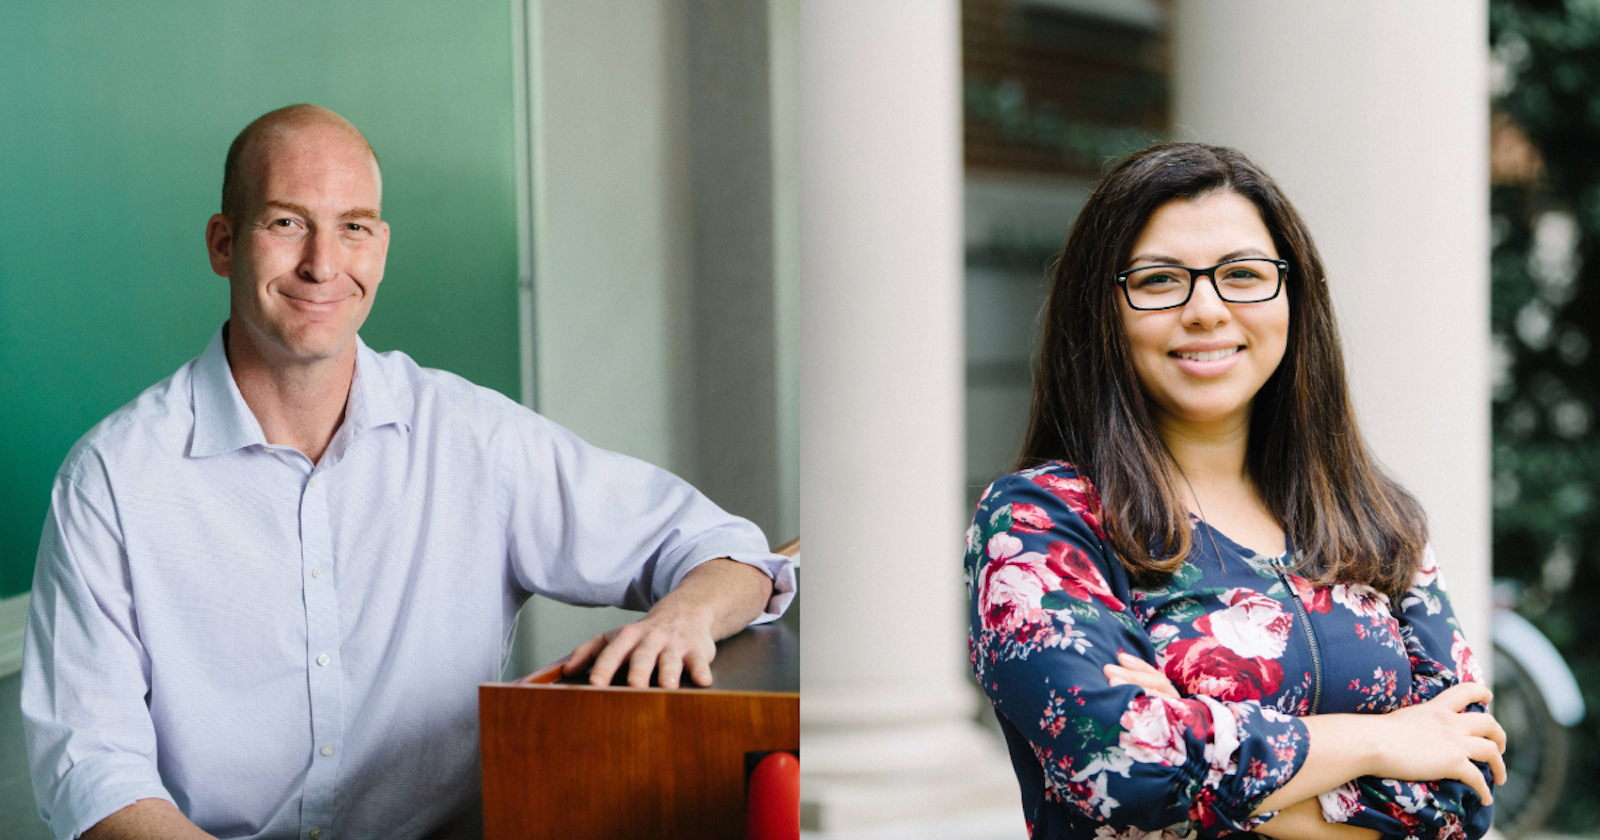 Todd Cherner, Ph.D. (left) and Yuliana Rodriguez Ph.D. (right)